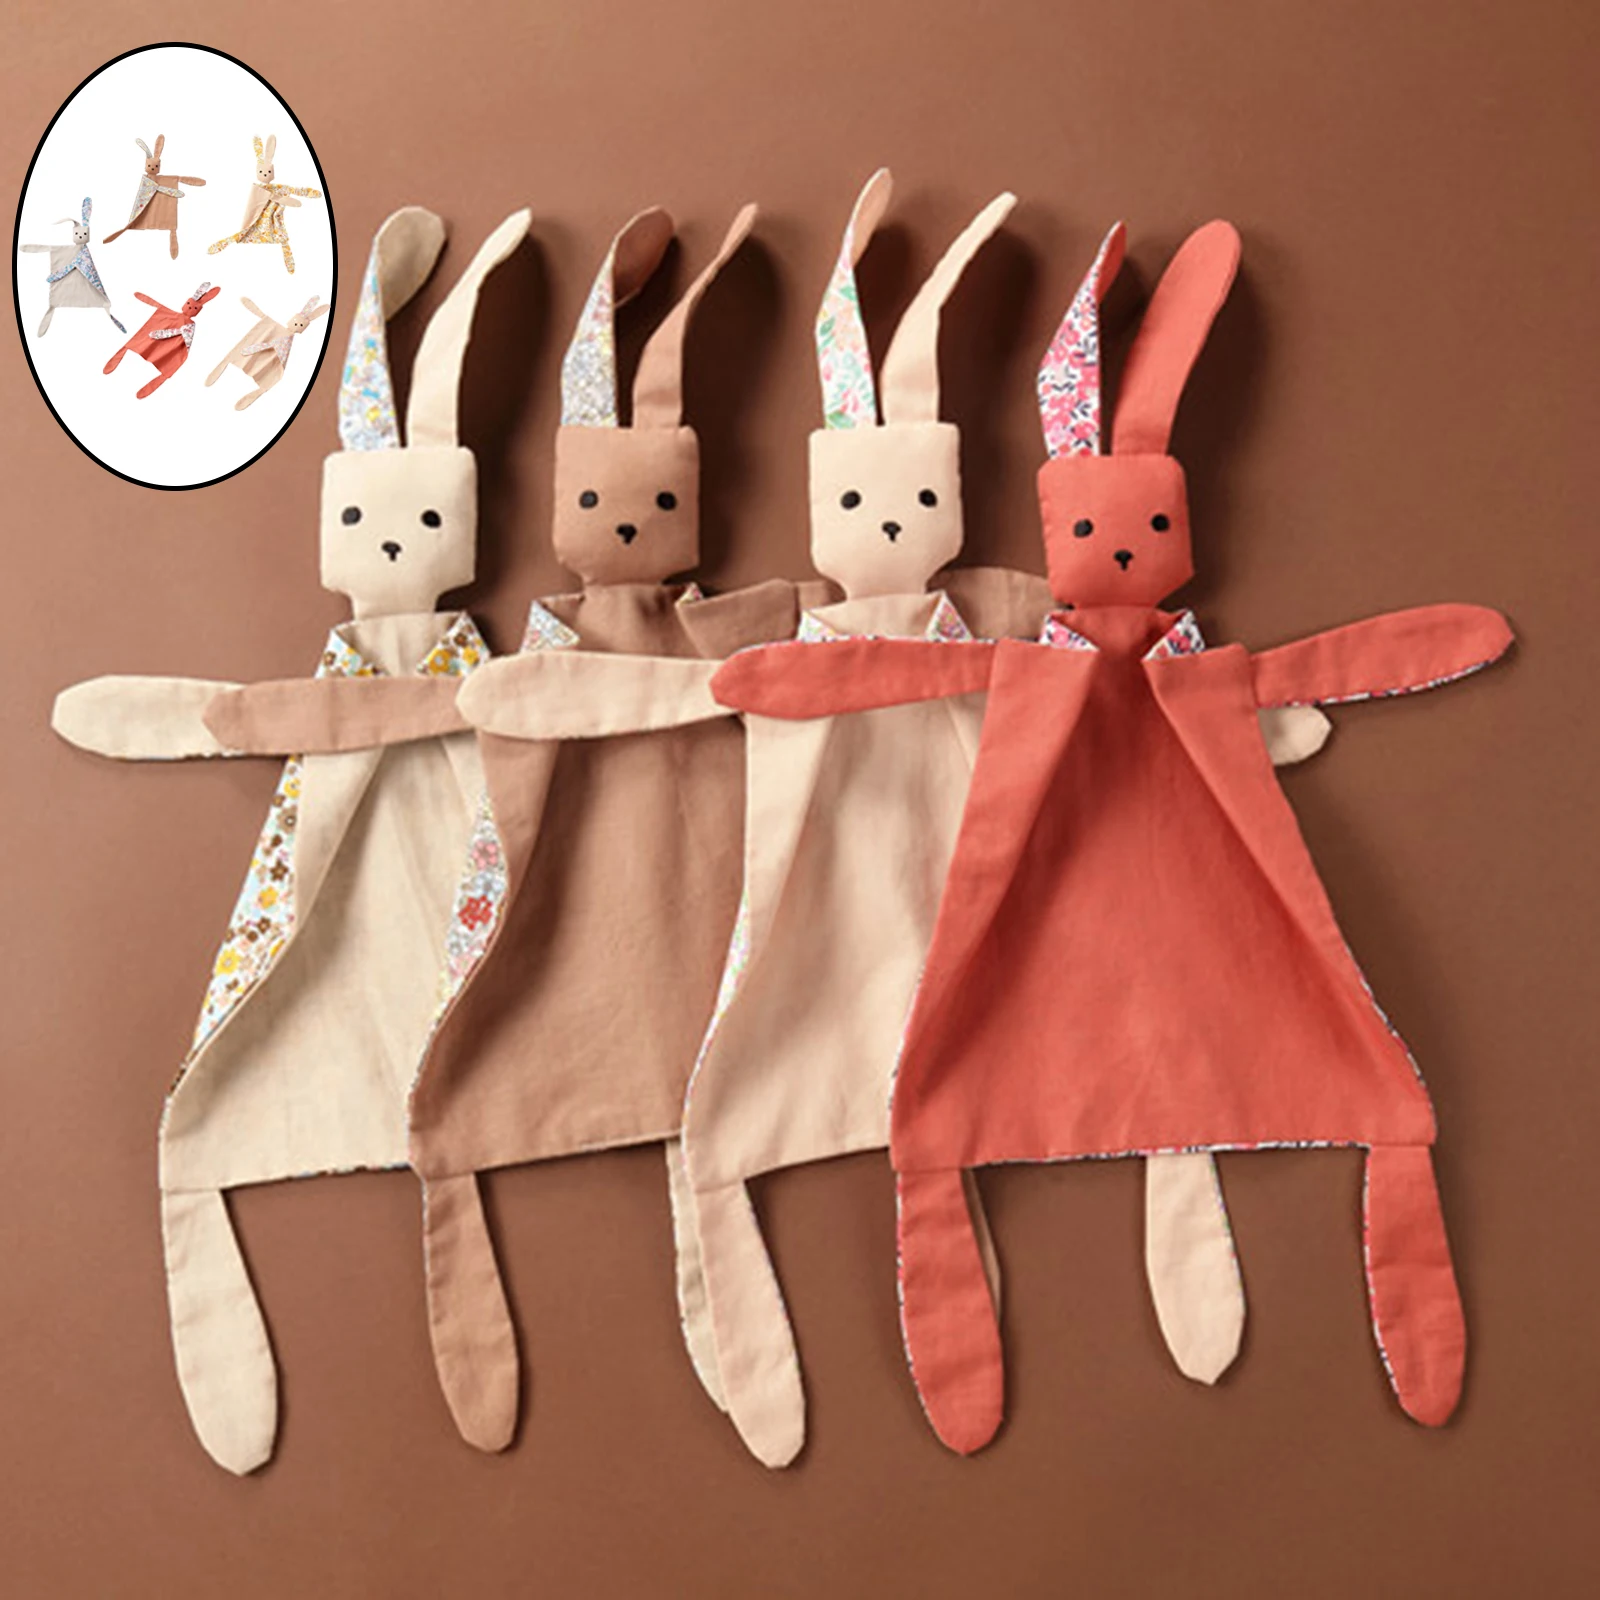 Cute Newborn Baby Soothing Appease Towel Doll Teether Comfort Cotton Animal Sleeping Calming Cuddling Blanket Toys Shower Gifts